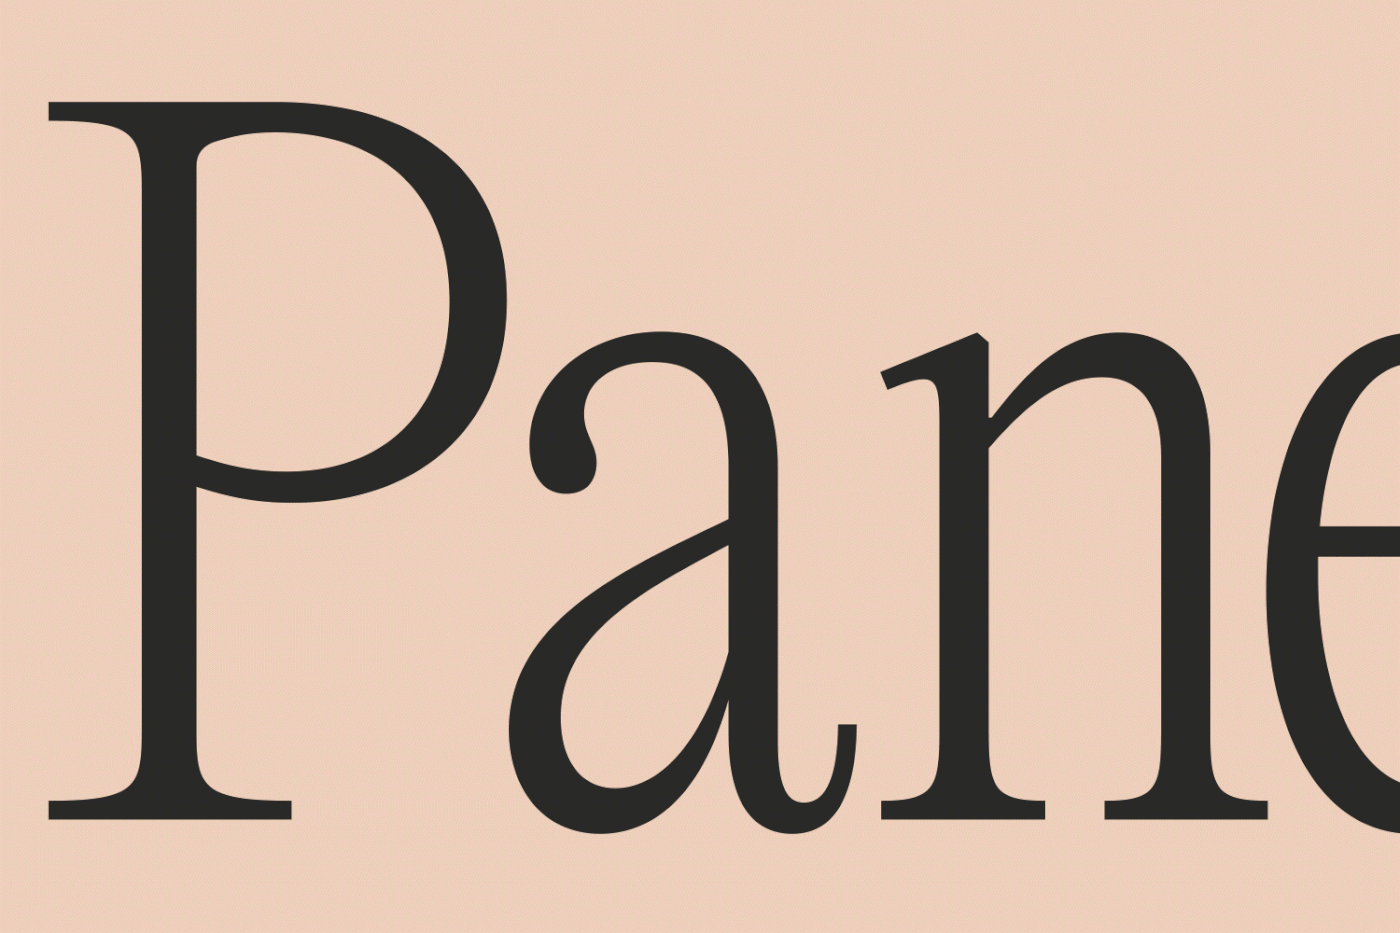 Logotype design by Requena Office for Spanish panettone brand Panettoni Pavolucci